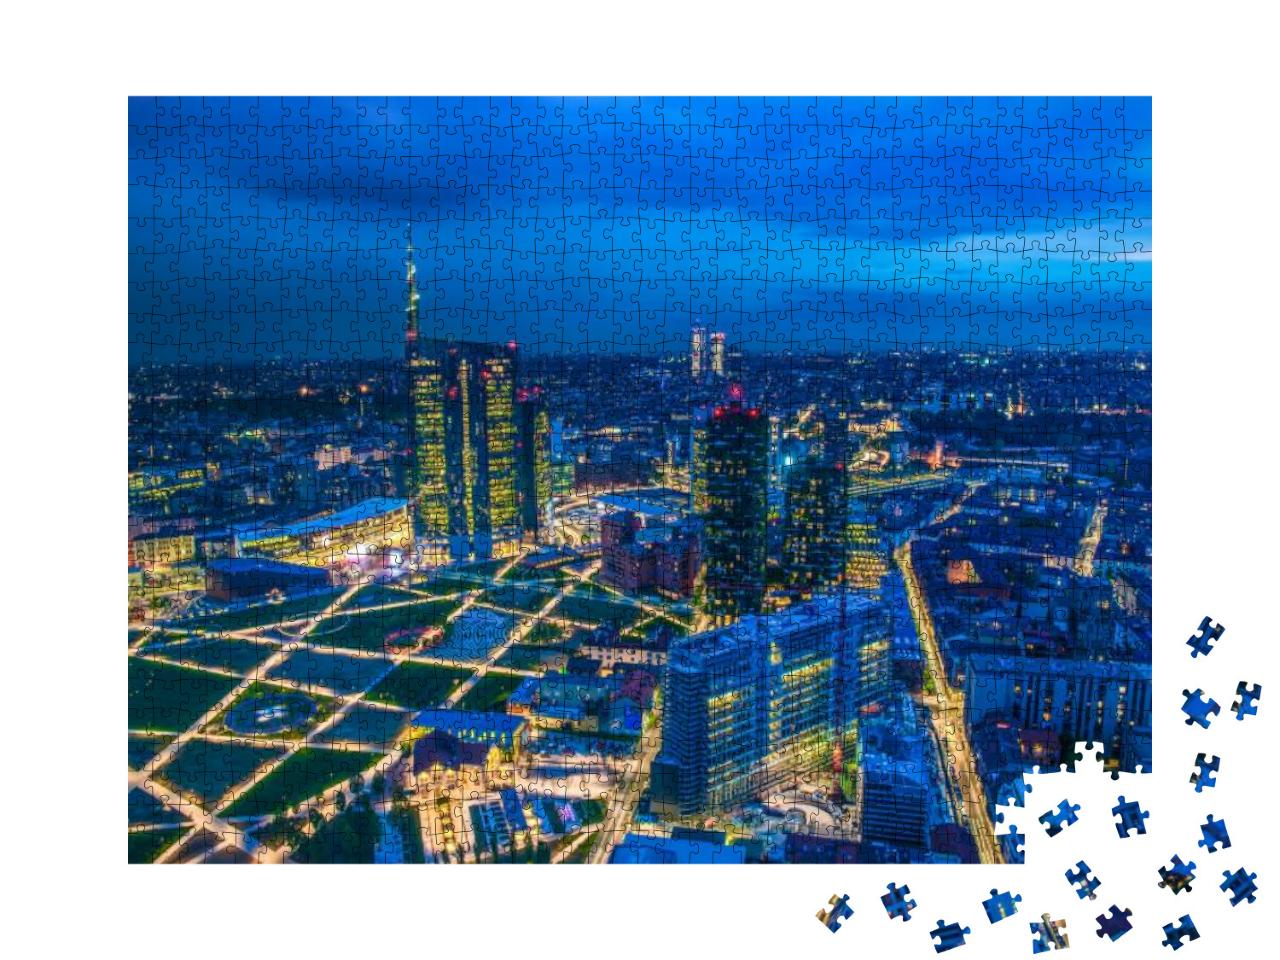 Milan Skyline Overlooking the Island from Above... Jigsaw Puzzle with 1000 pieces